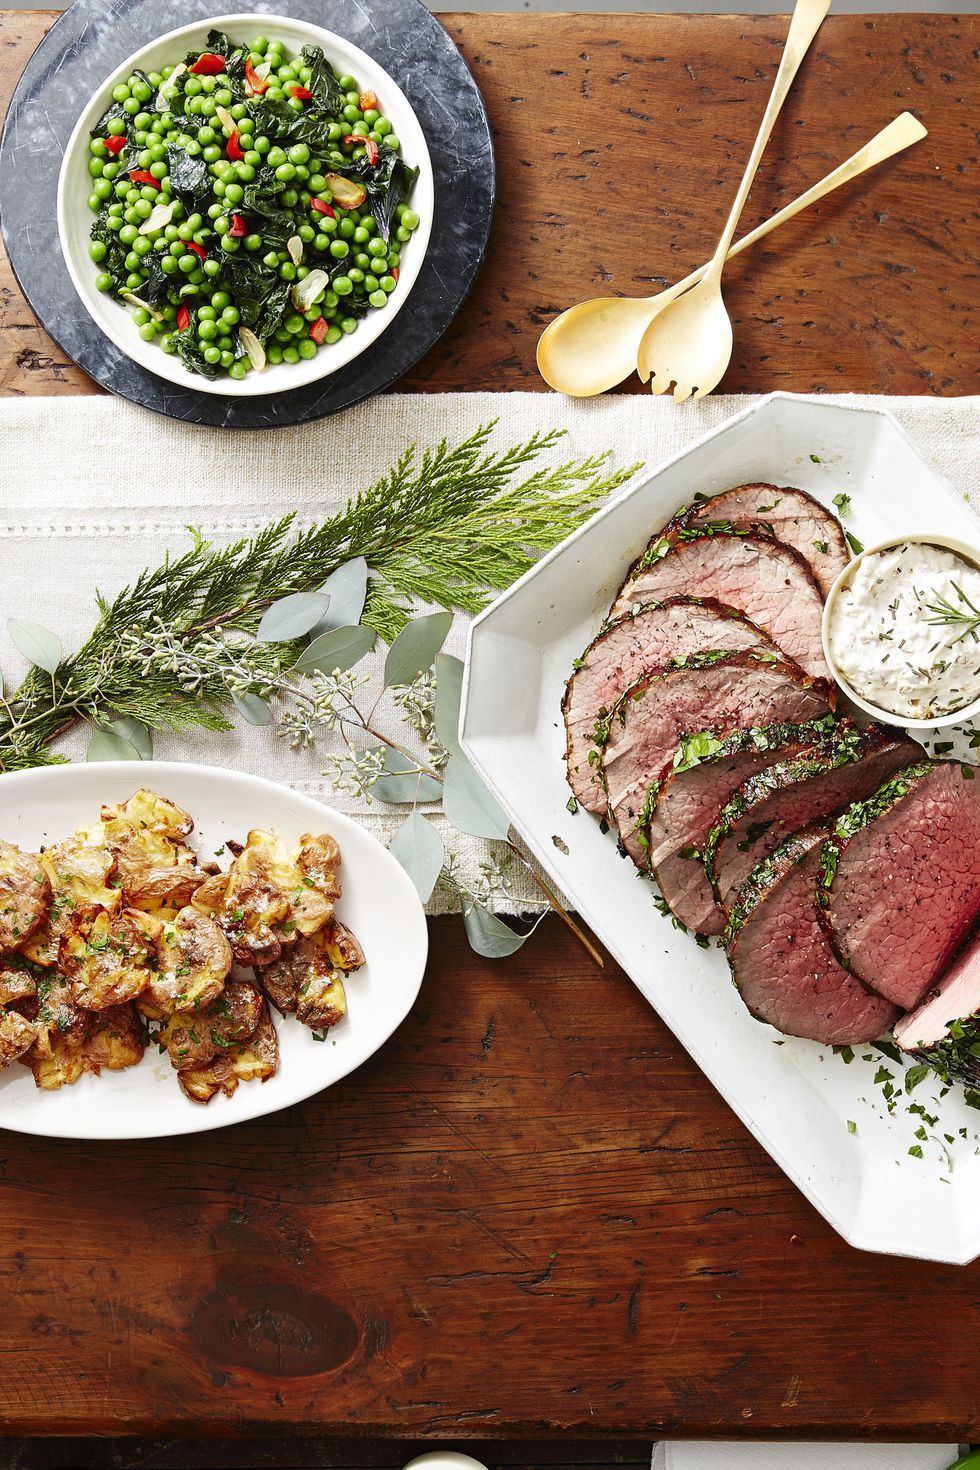 Beef Tenderloin Menu For Christmas Dinner - It can be cheaper to buy a whole tenderloin and ...